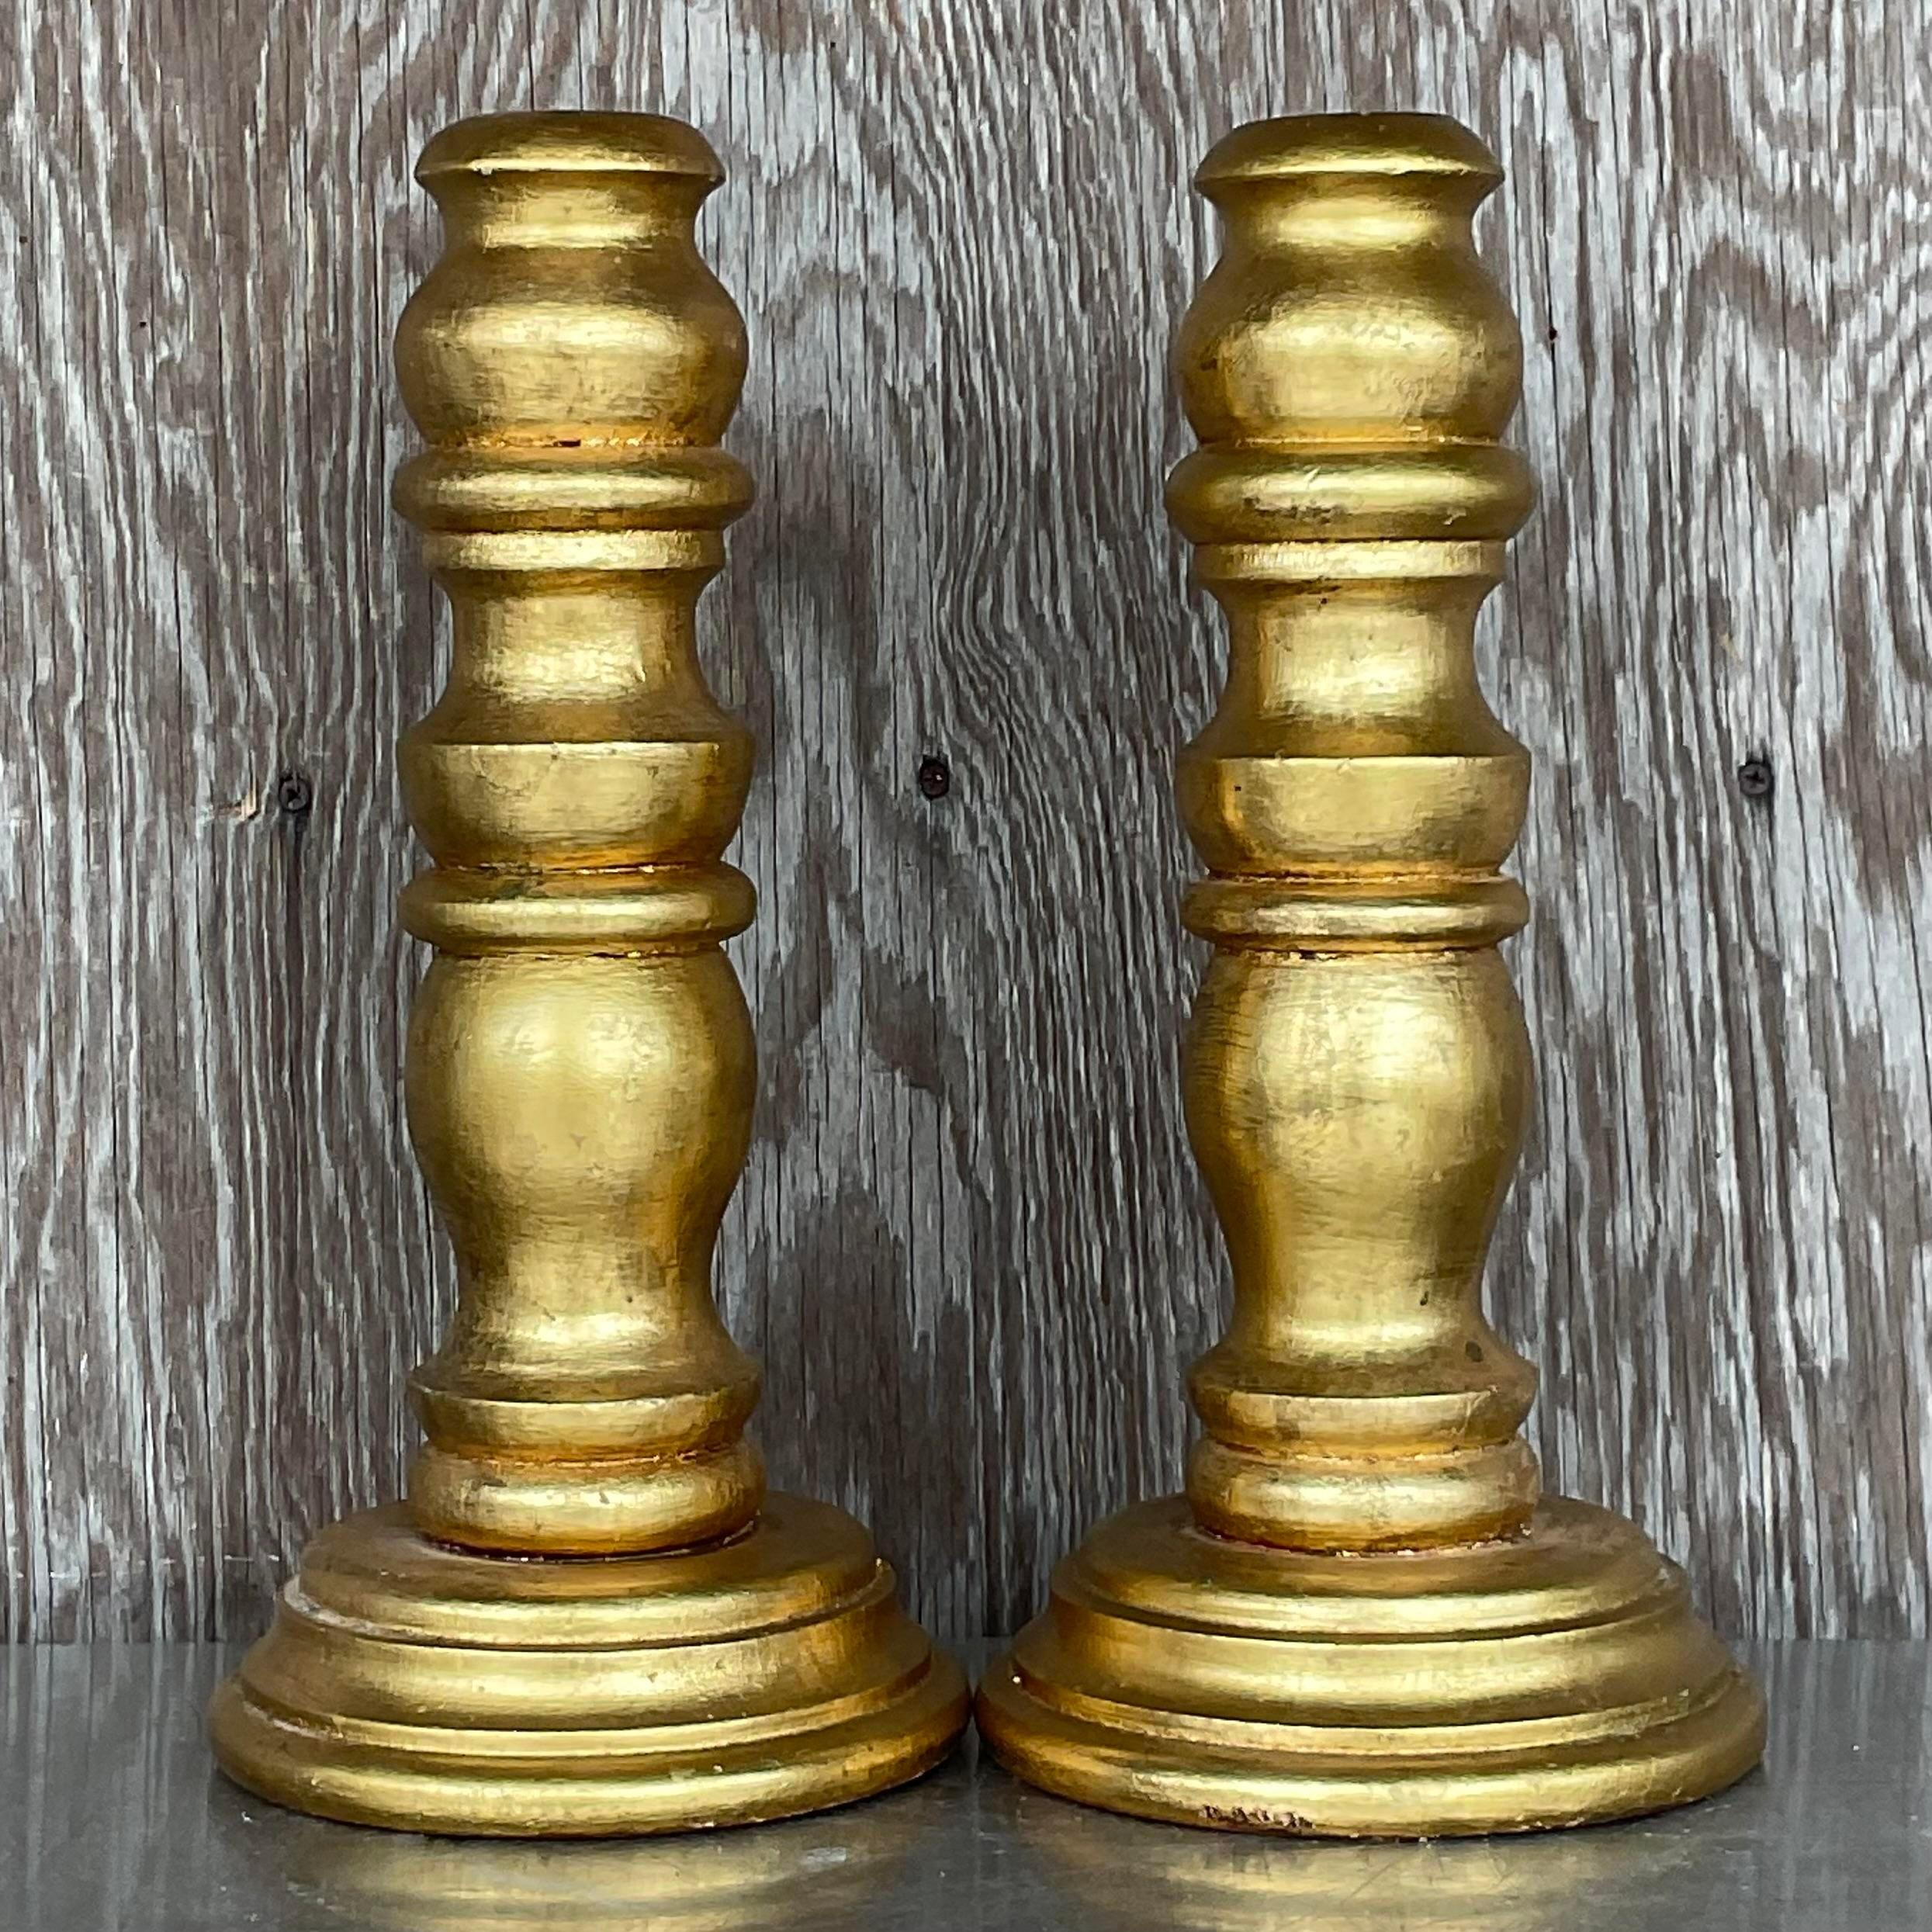 A gorgeous pair of wooden candlesticks. Chic wood turned design with a bright gilt finish. Acquired from a Palm Beach estate.